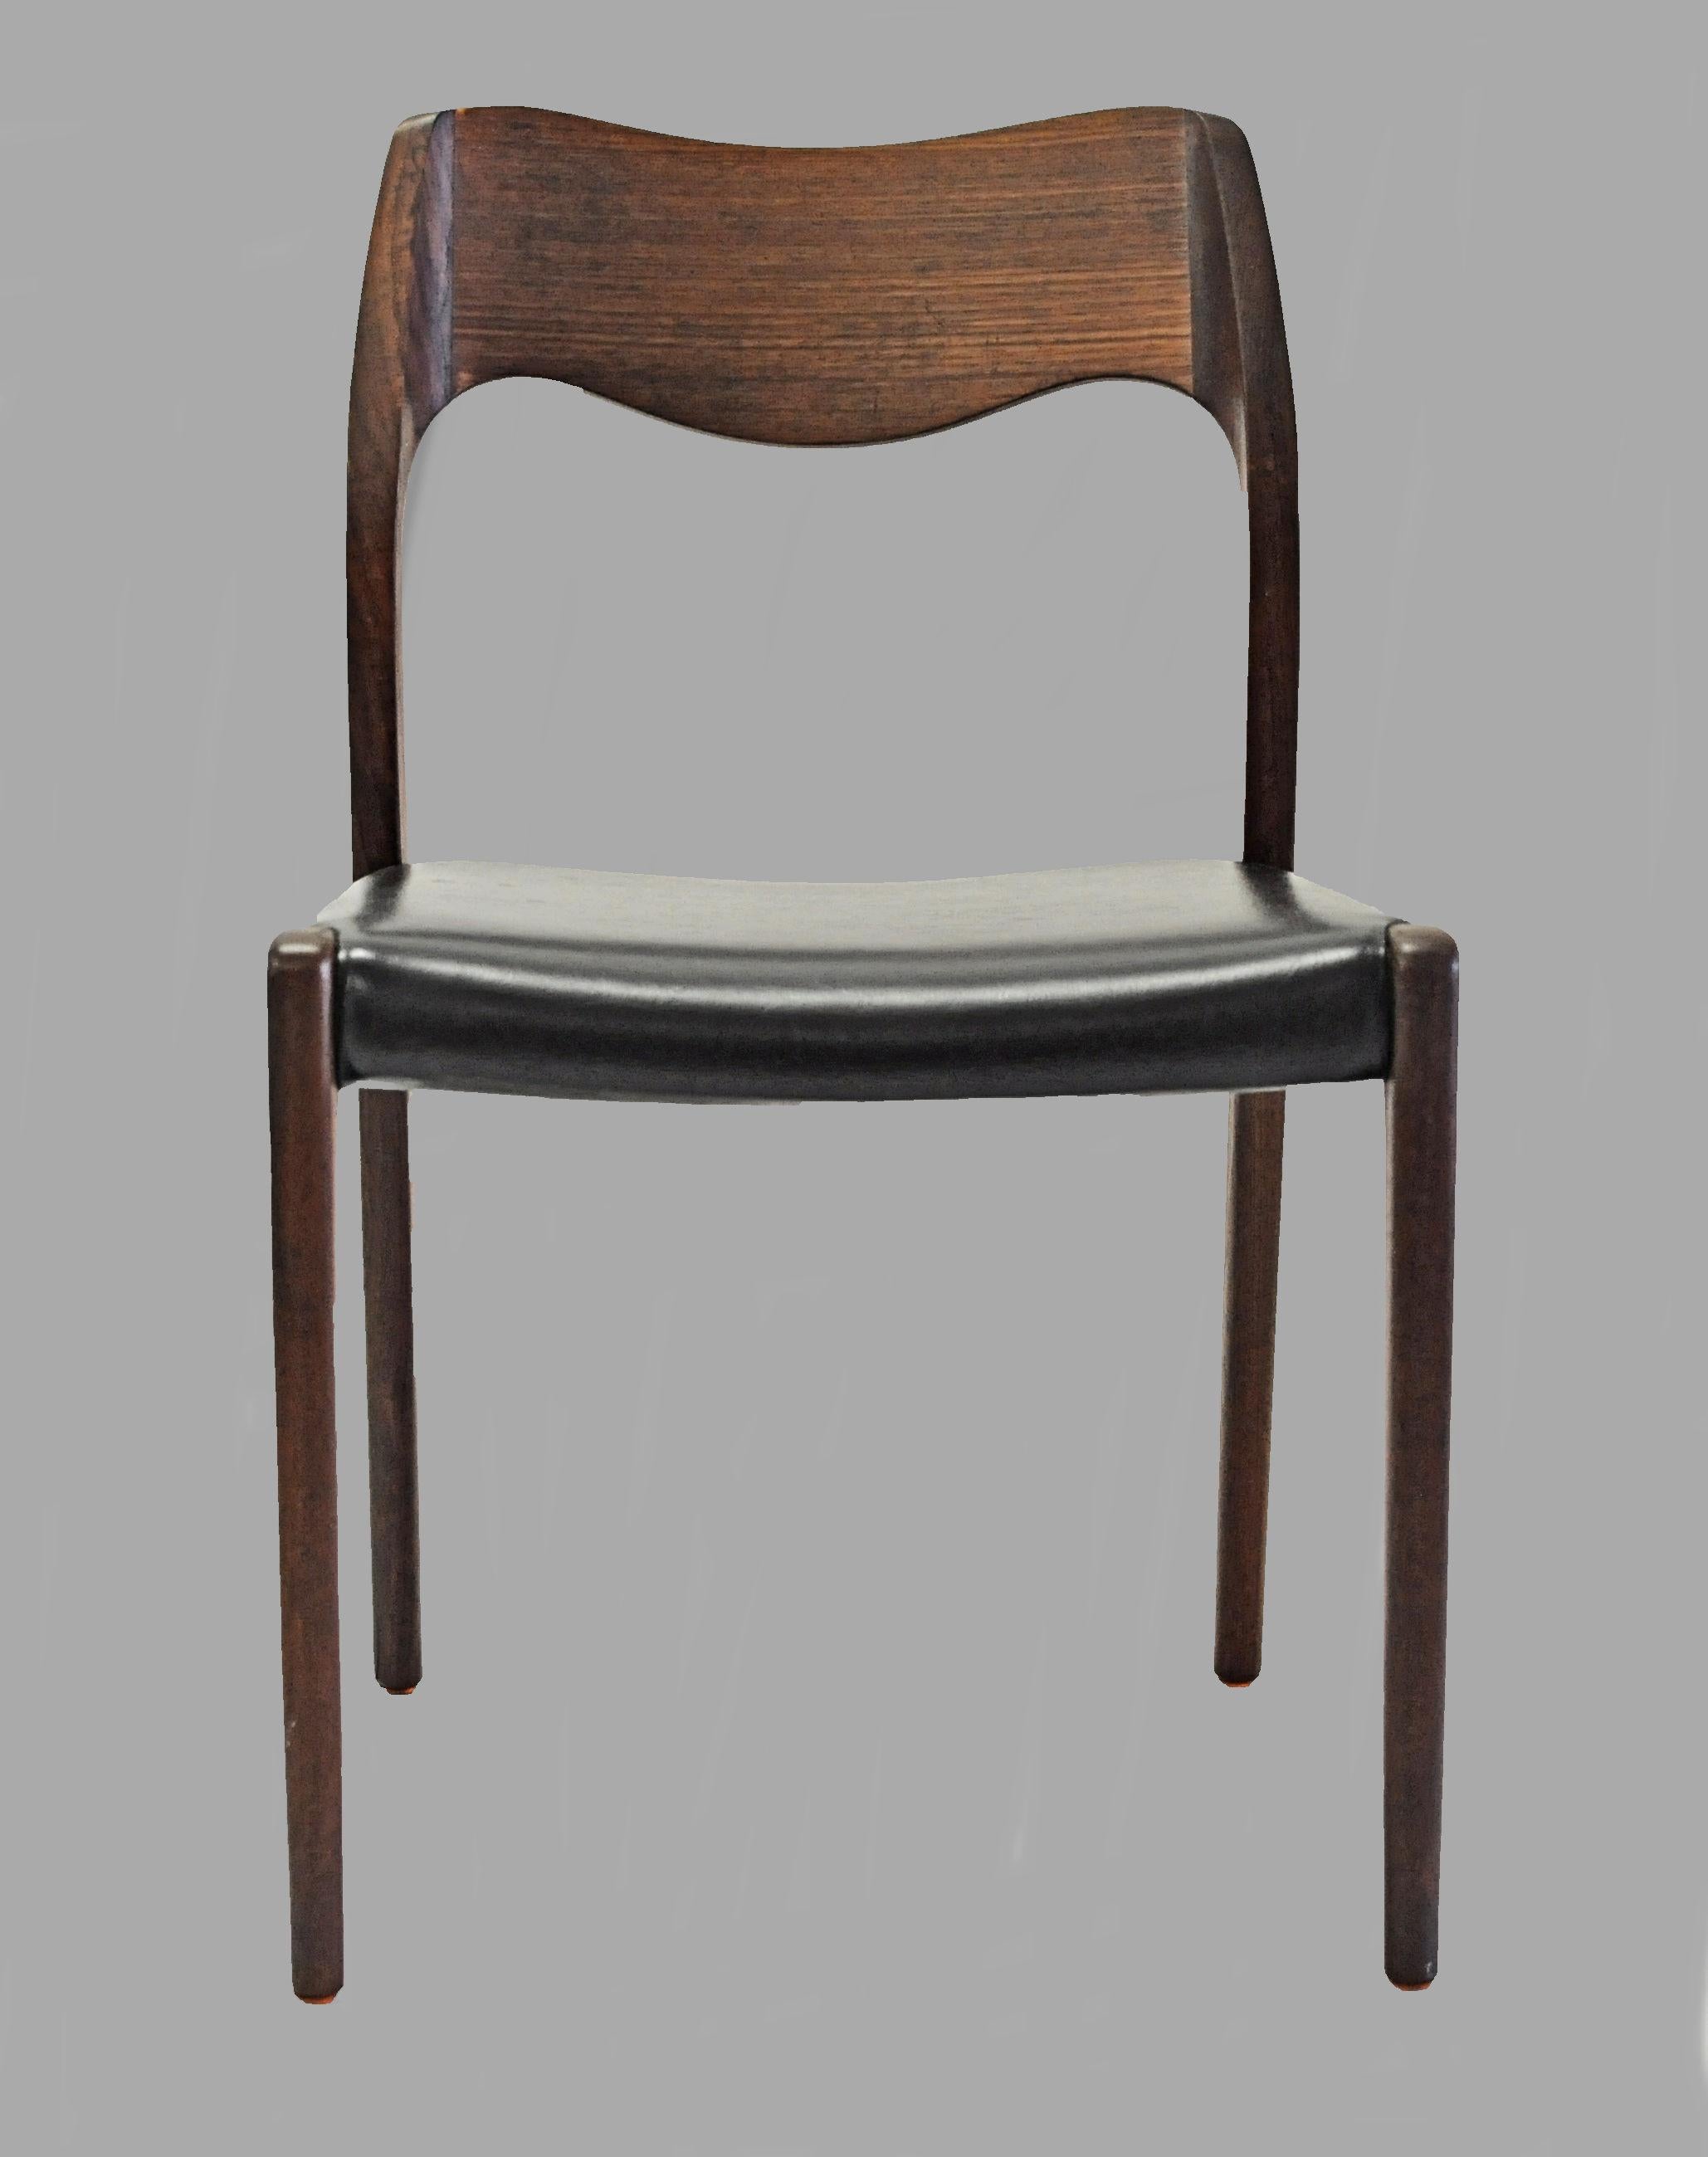 Set of 12 teak dining chairs designed by Niels Otto Møller in 1951.

The chairs feature a solid frame and backrest in teak designed with straight lined legs and an elegant organic shaped backrest with the soft lines and curves that you often see in